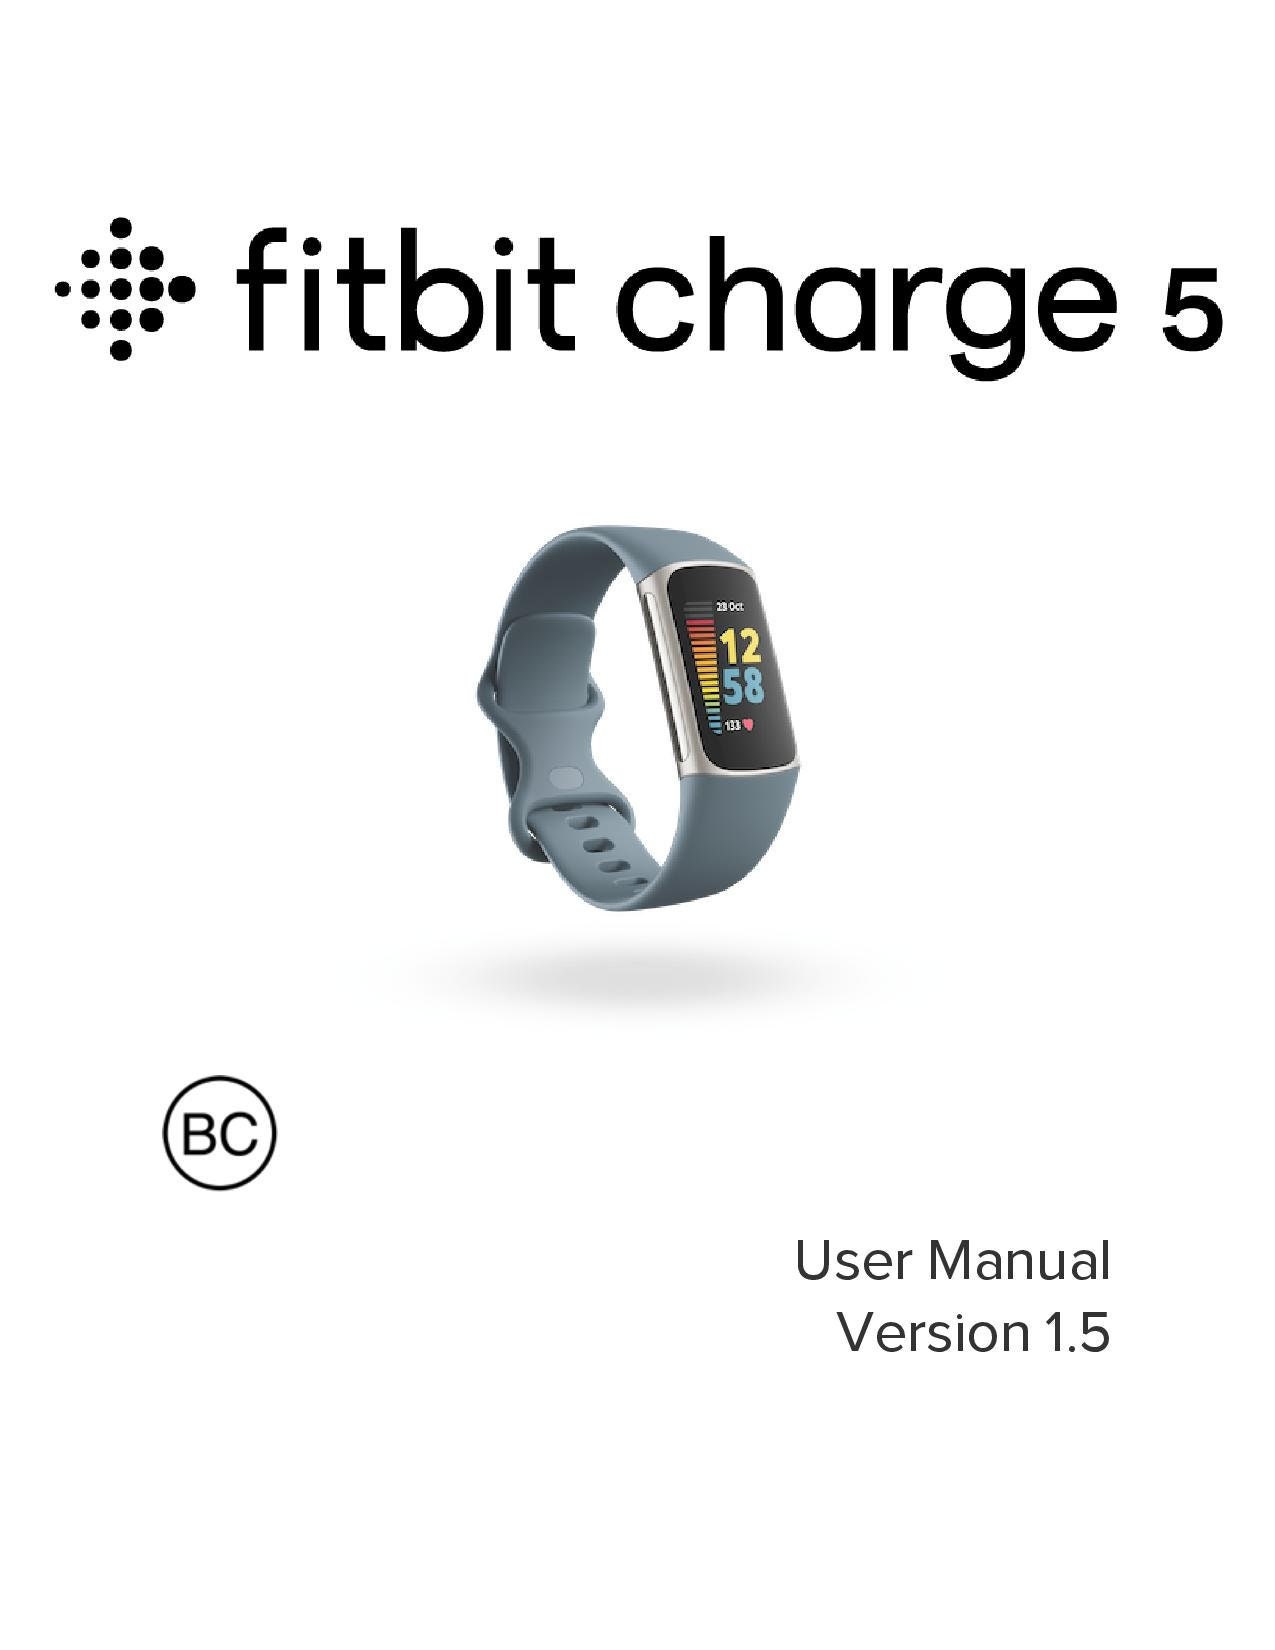 Fitbit Charge 5 User Manual User - Etsy